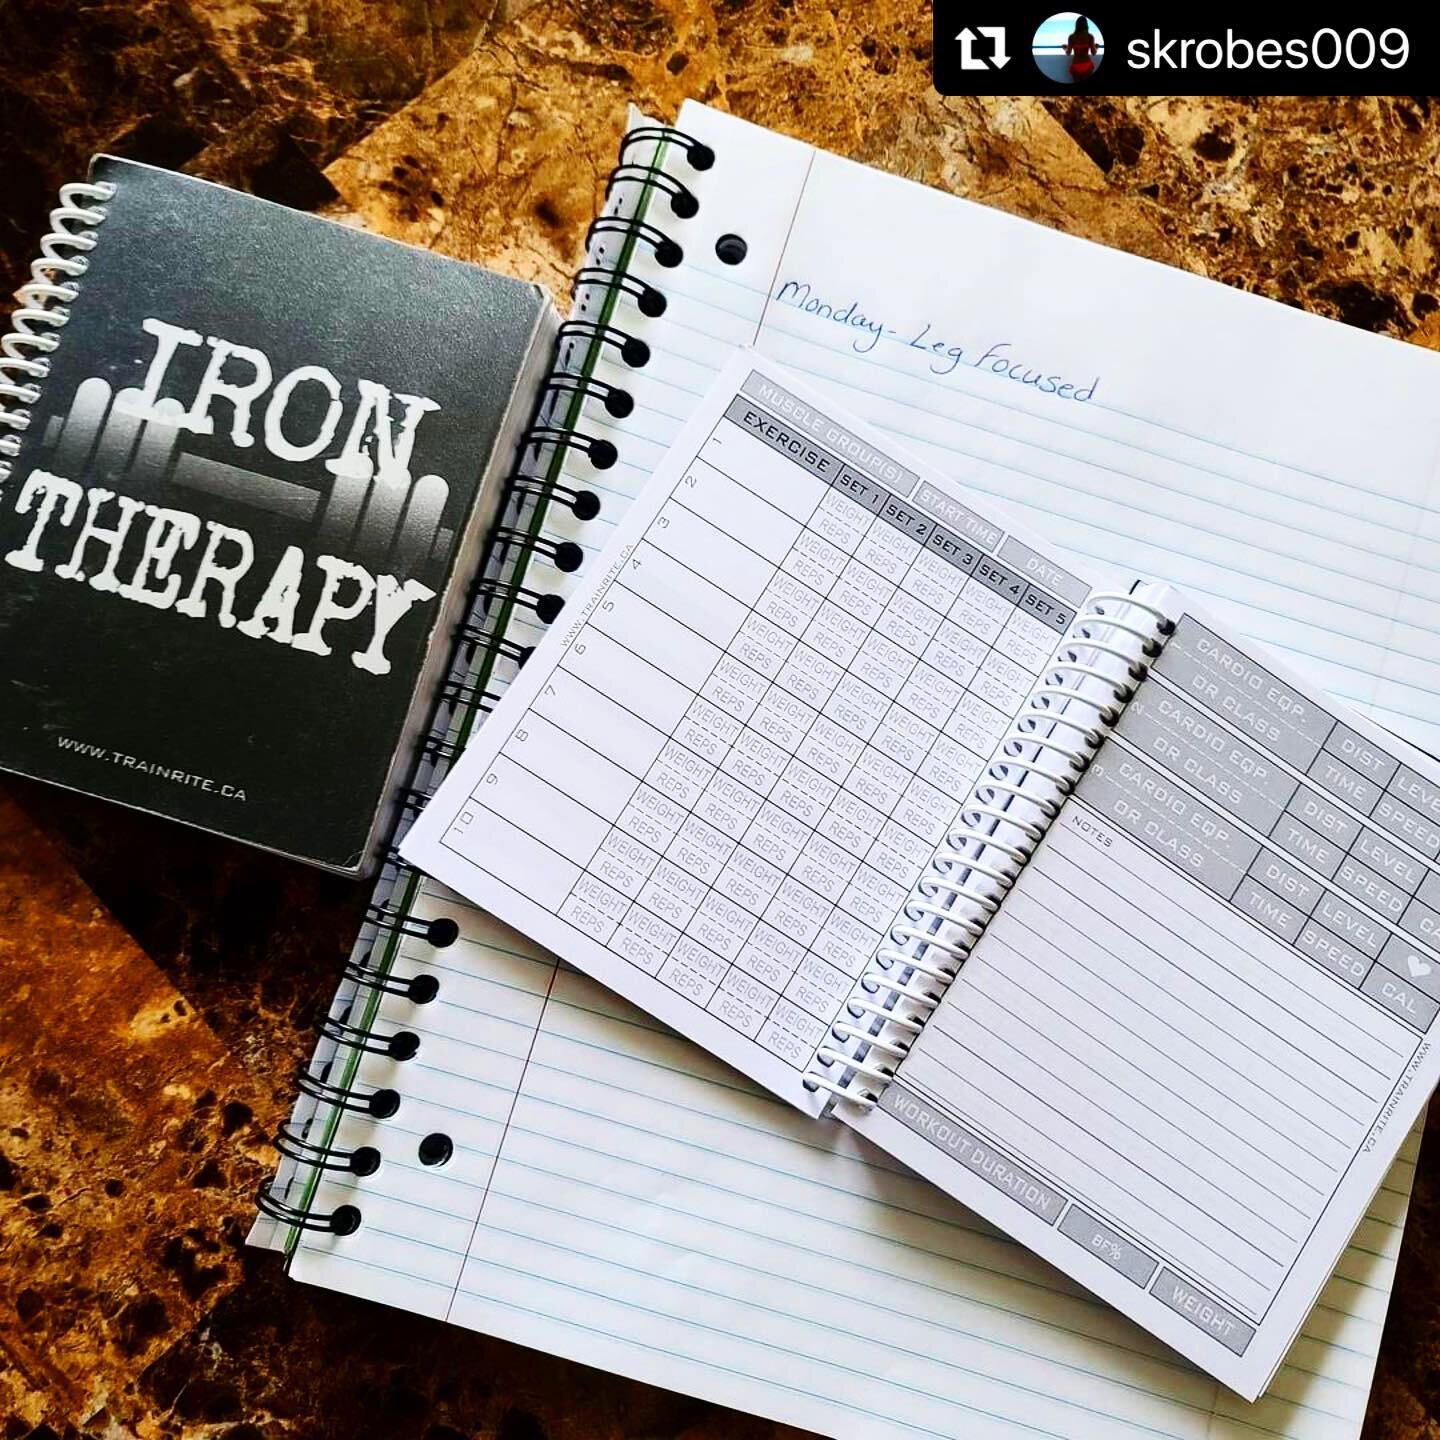 Plan plan plan. . . #Repost @skrobes009 
・・・
#sundayfunday 

Creating a new program today. Completed 6 weeks of my deload program, giving my body a break but still lifting for conditioning. 

Creating this program with less reps and heavier weight; b